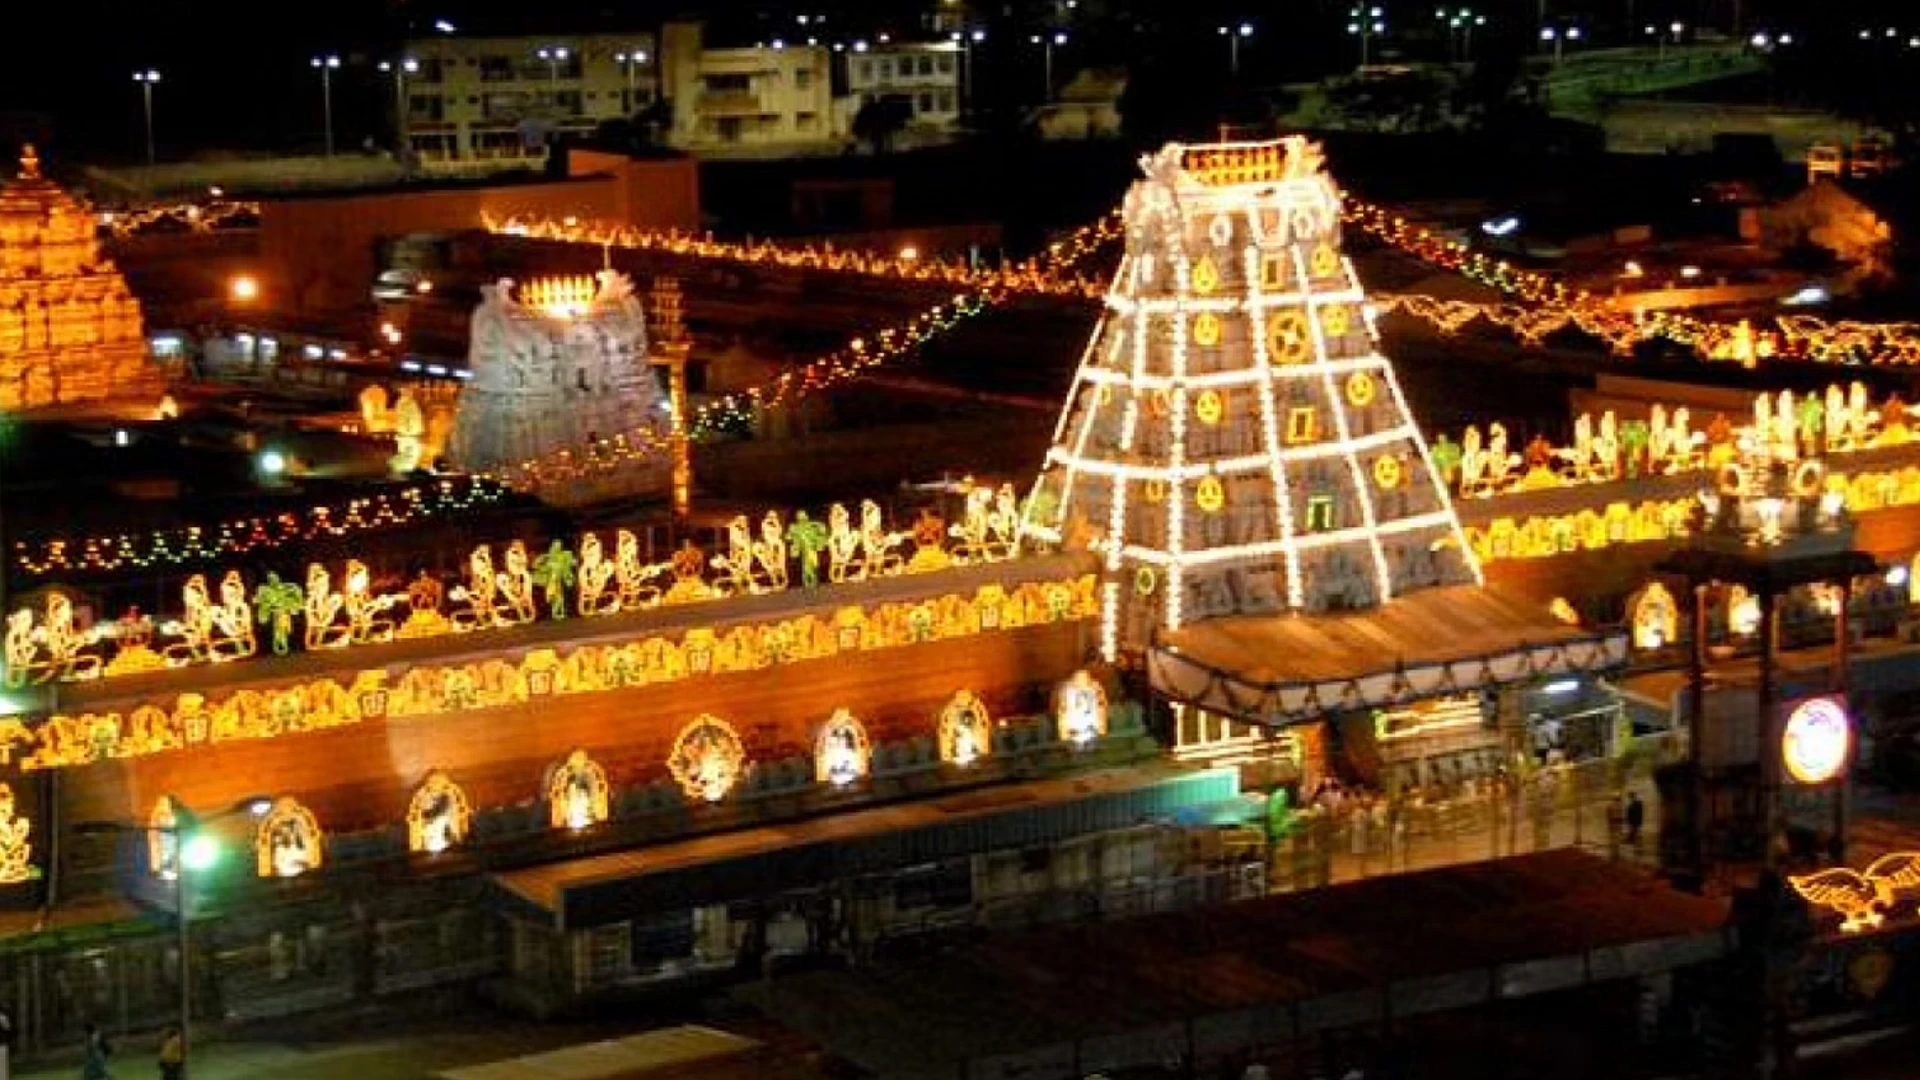 TTD online booking: Steps to book Rs 300 Special Entry Darshan tickets for Tirupati Balaji